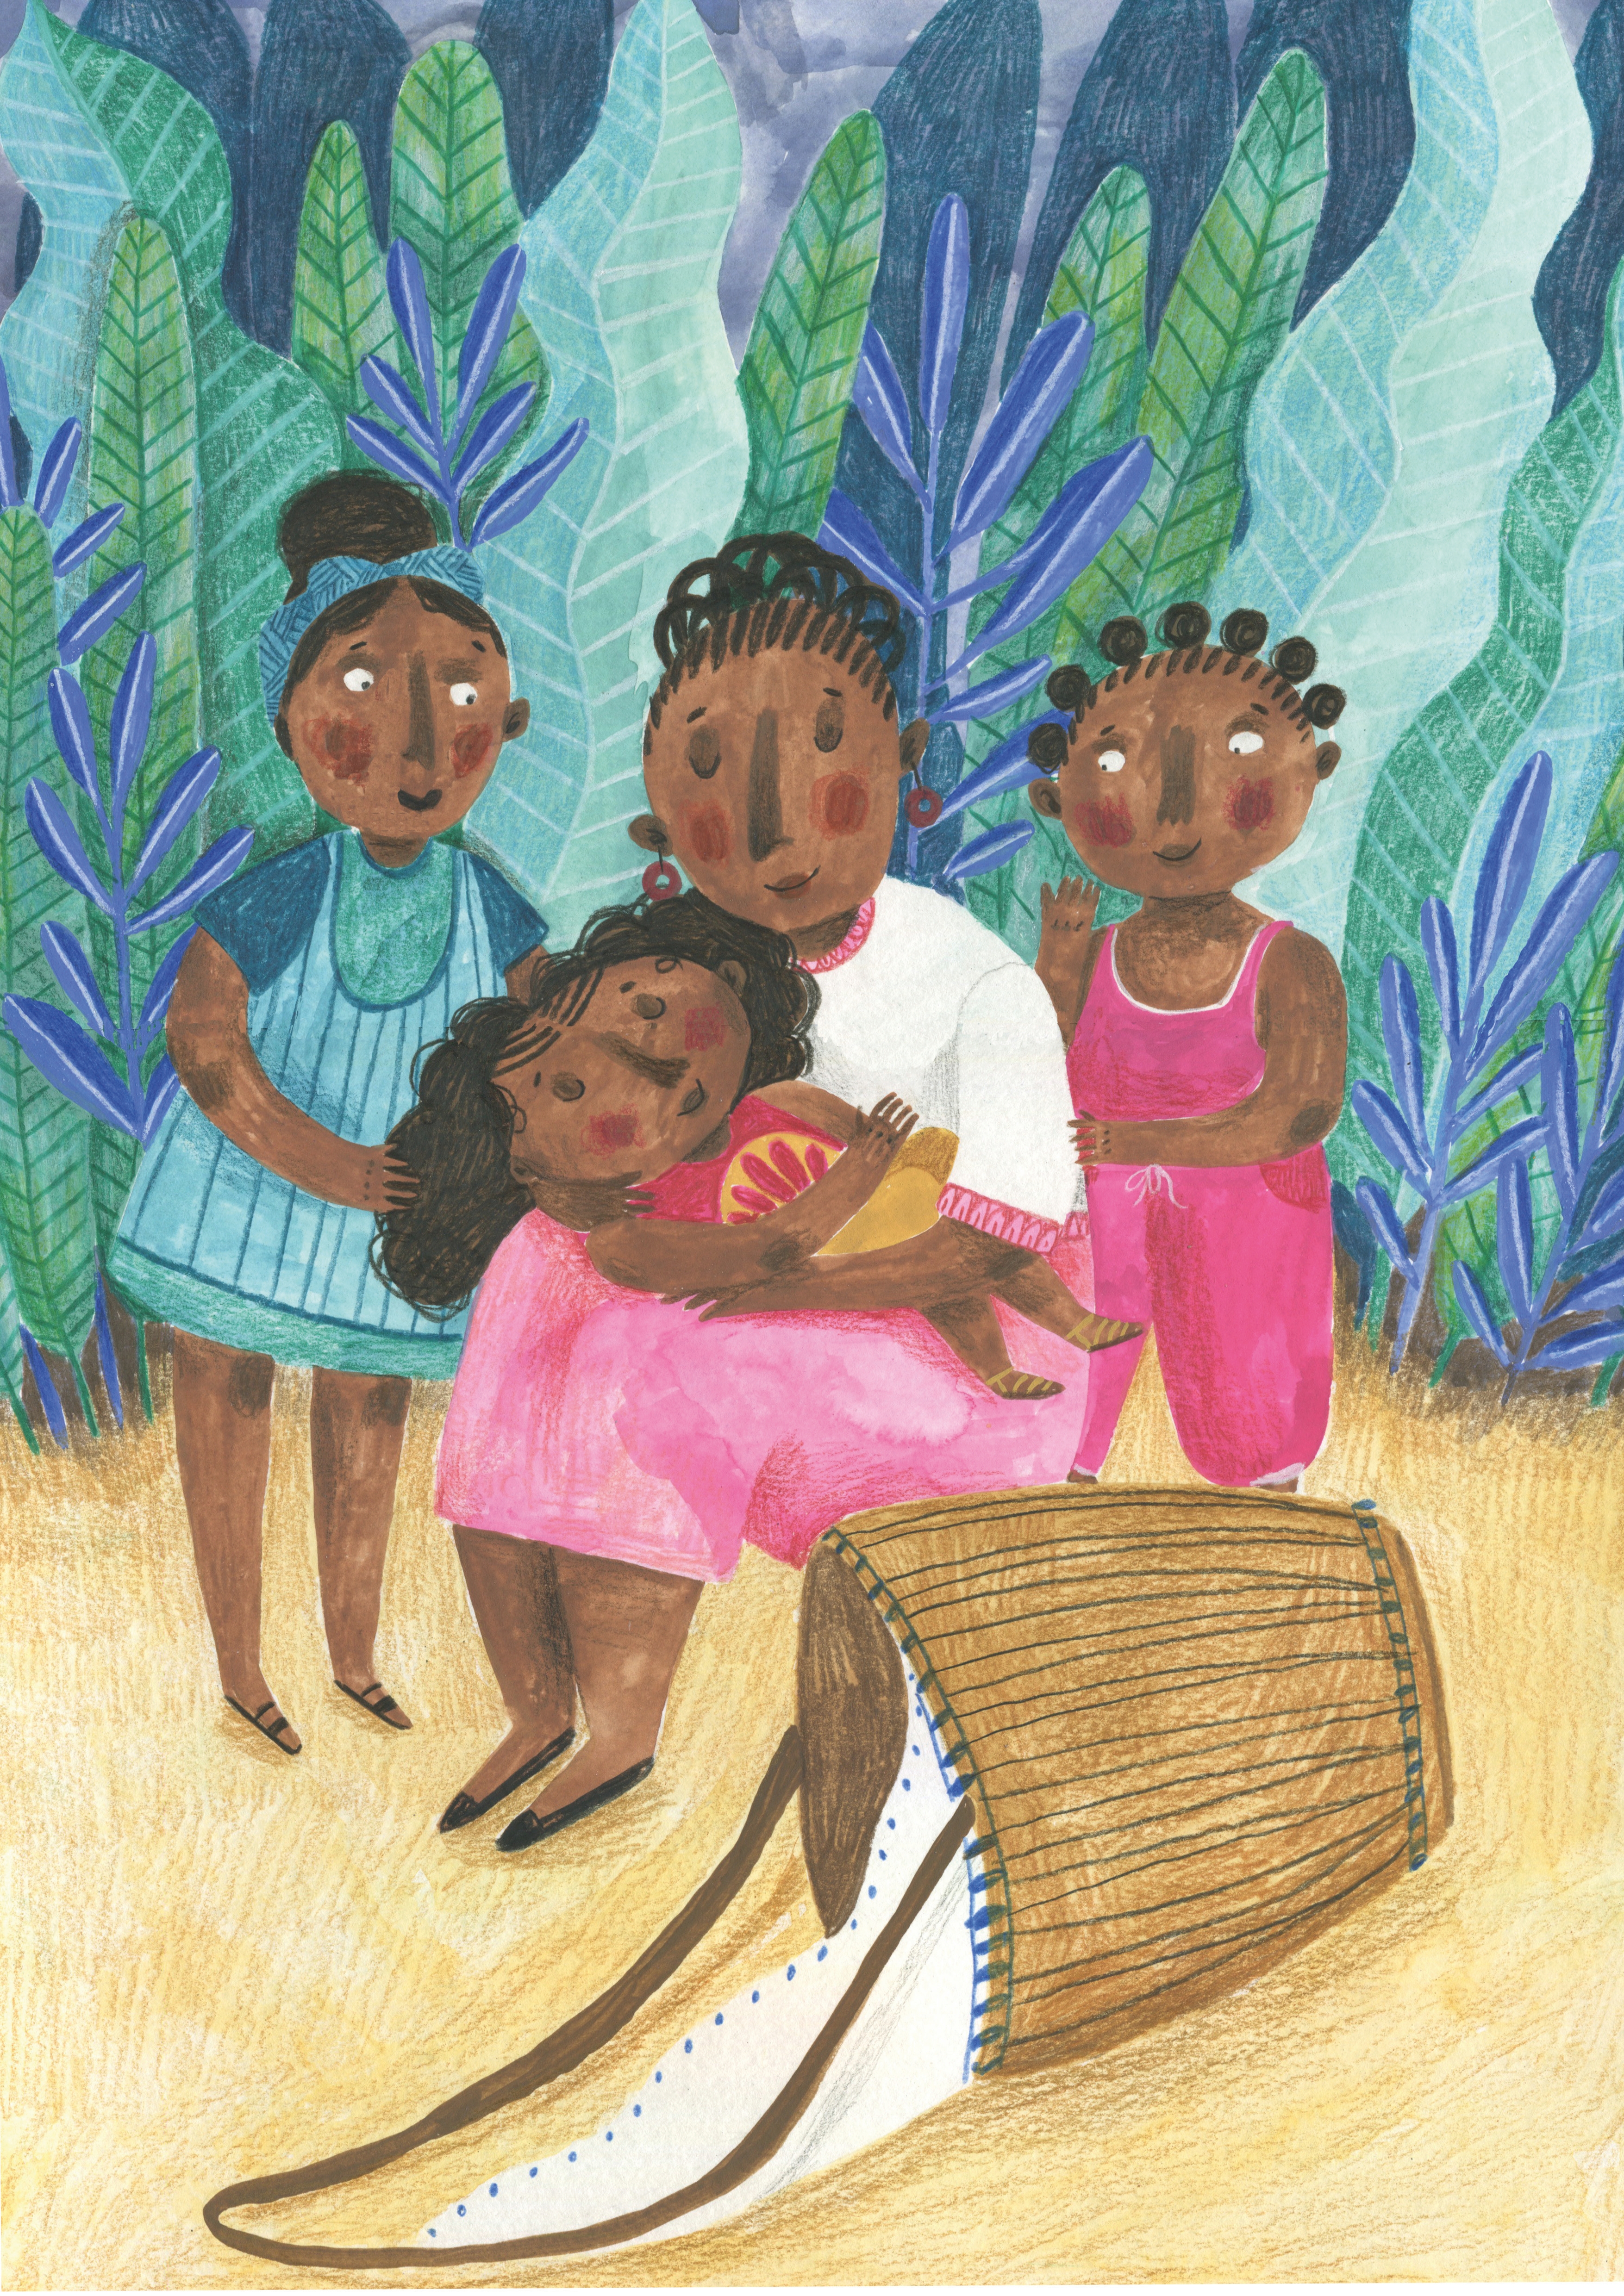 An illustration from the story Tamasha and the Troll showing Tamasha being reunited with her mum and sisters after escaping the troll